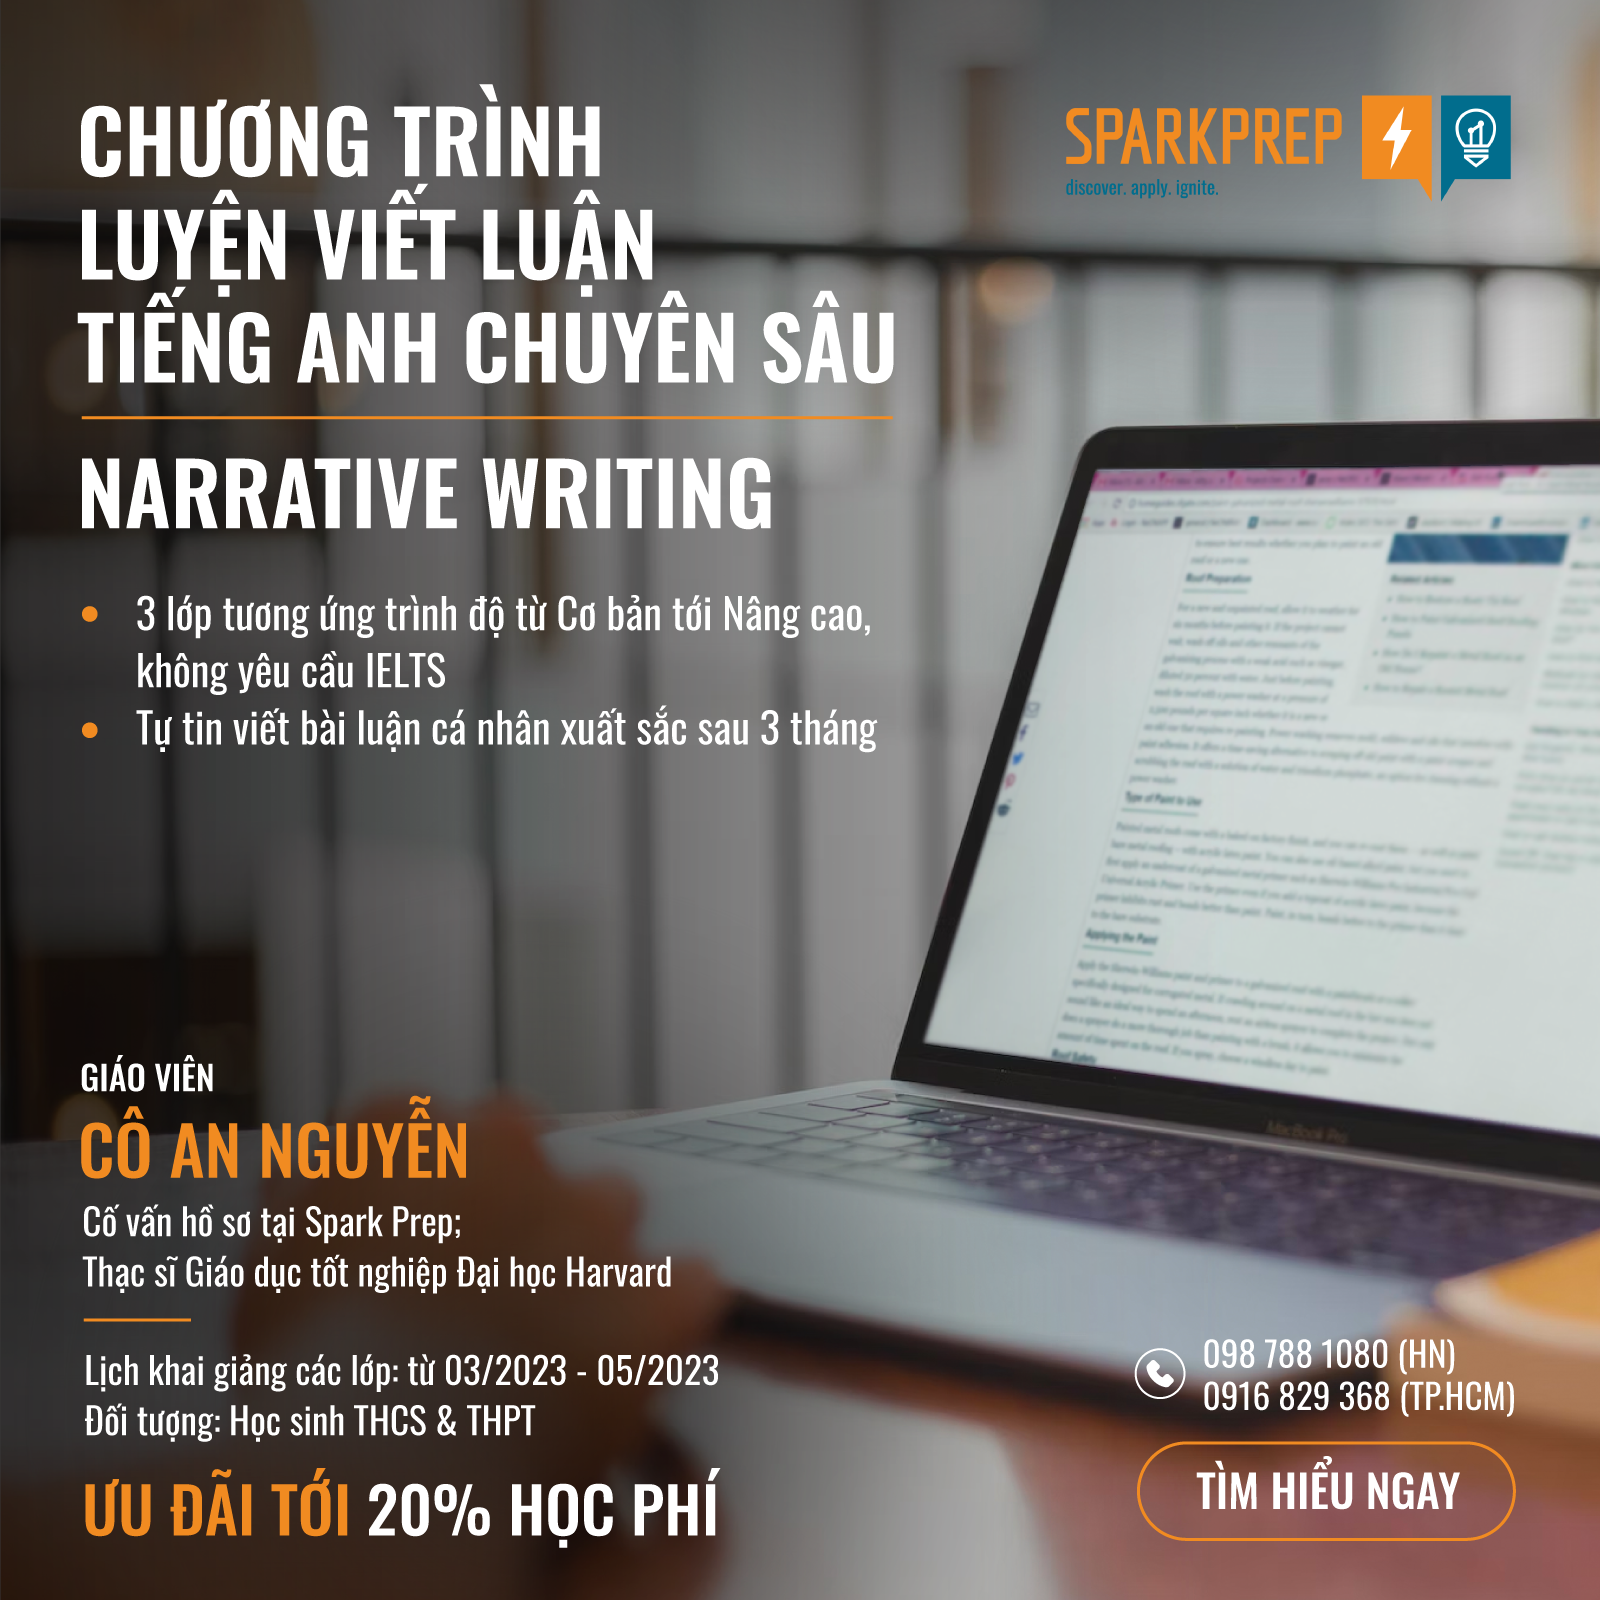 Intensive Narrative Writing Course